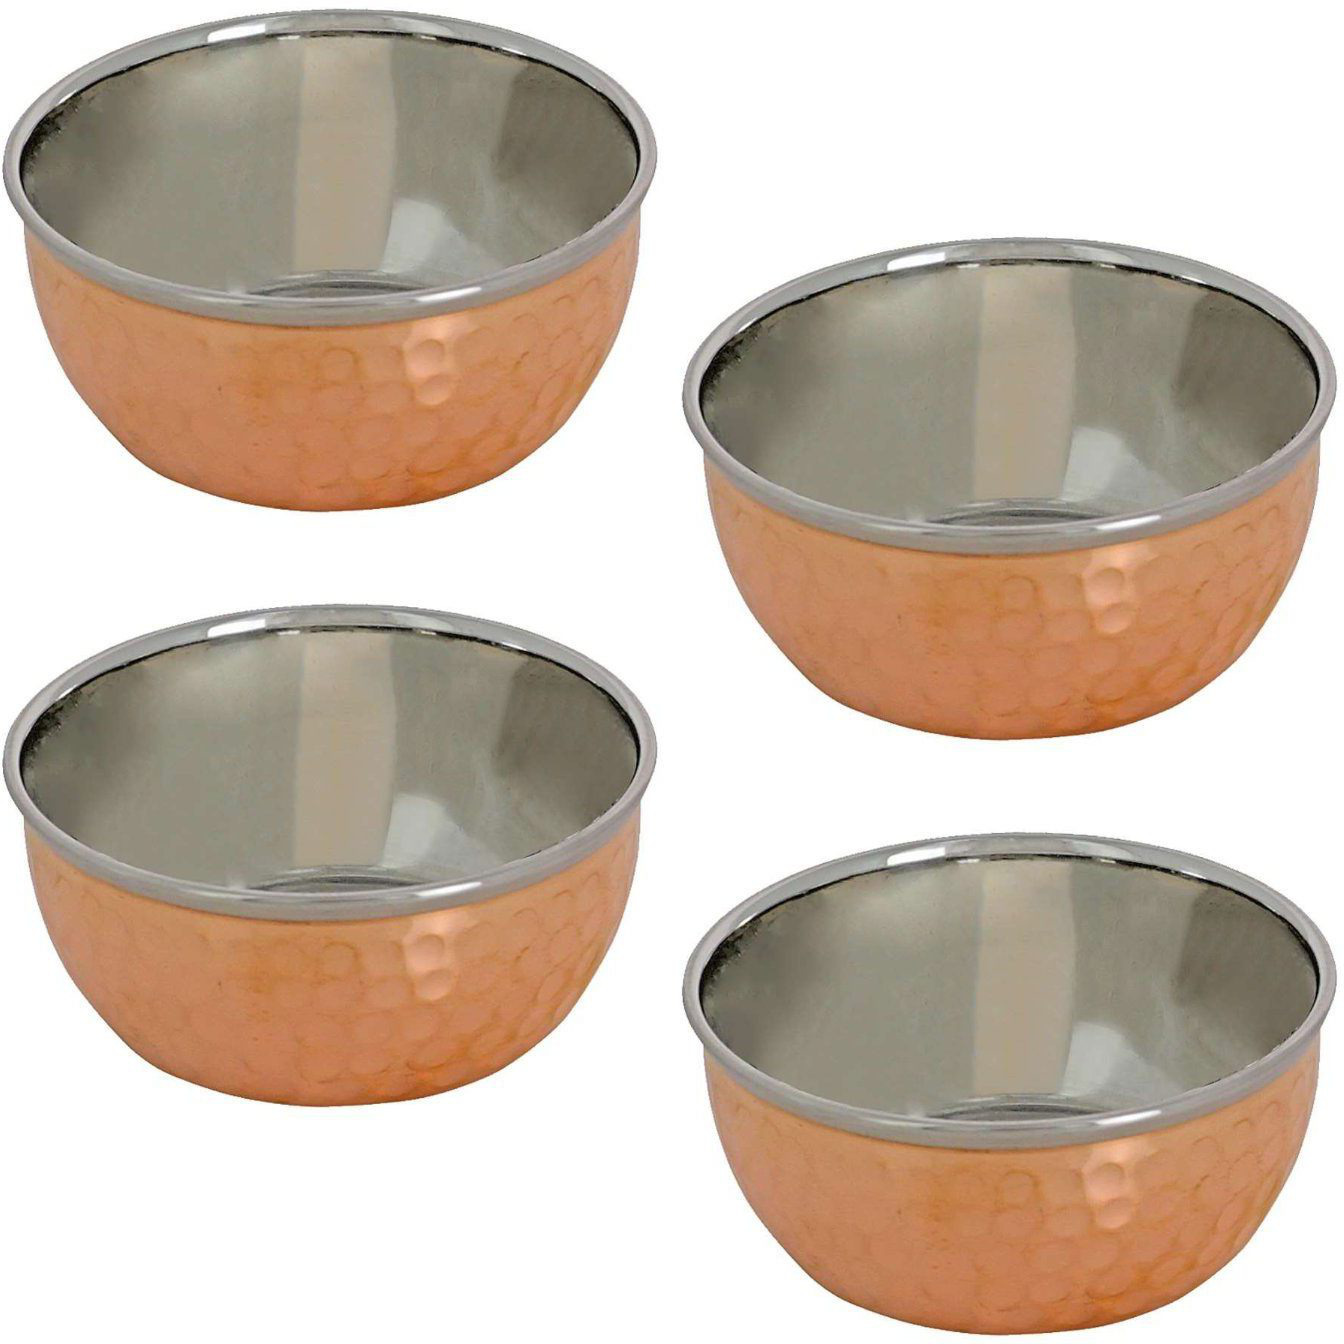 Prisha India Craft B. Set of 6 Dinnerware Traditional Stainless Steel Copper Dinner Set of Thali Plate, Bowls, Glass and Spoons, Dia 13  With 1 Stainless Steel Copper Pitcher Jug - Christmas Gift